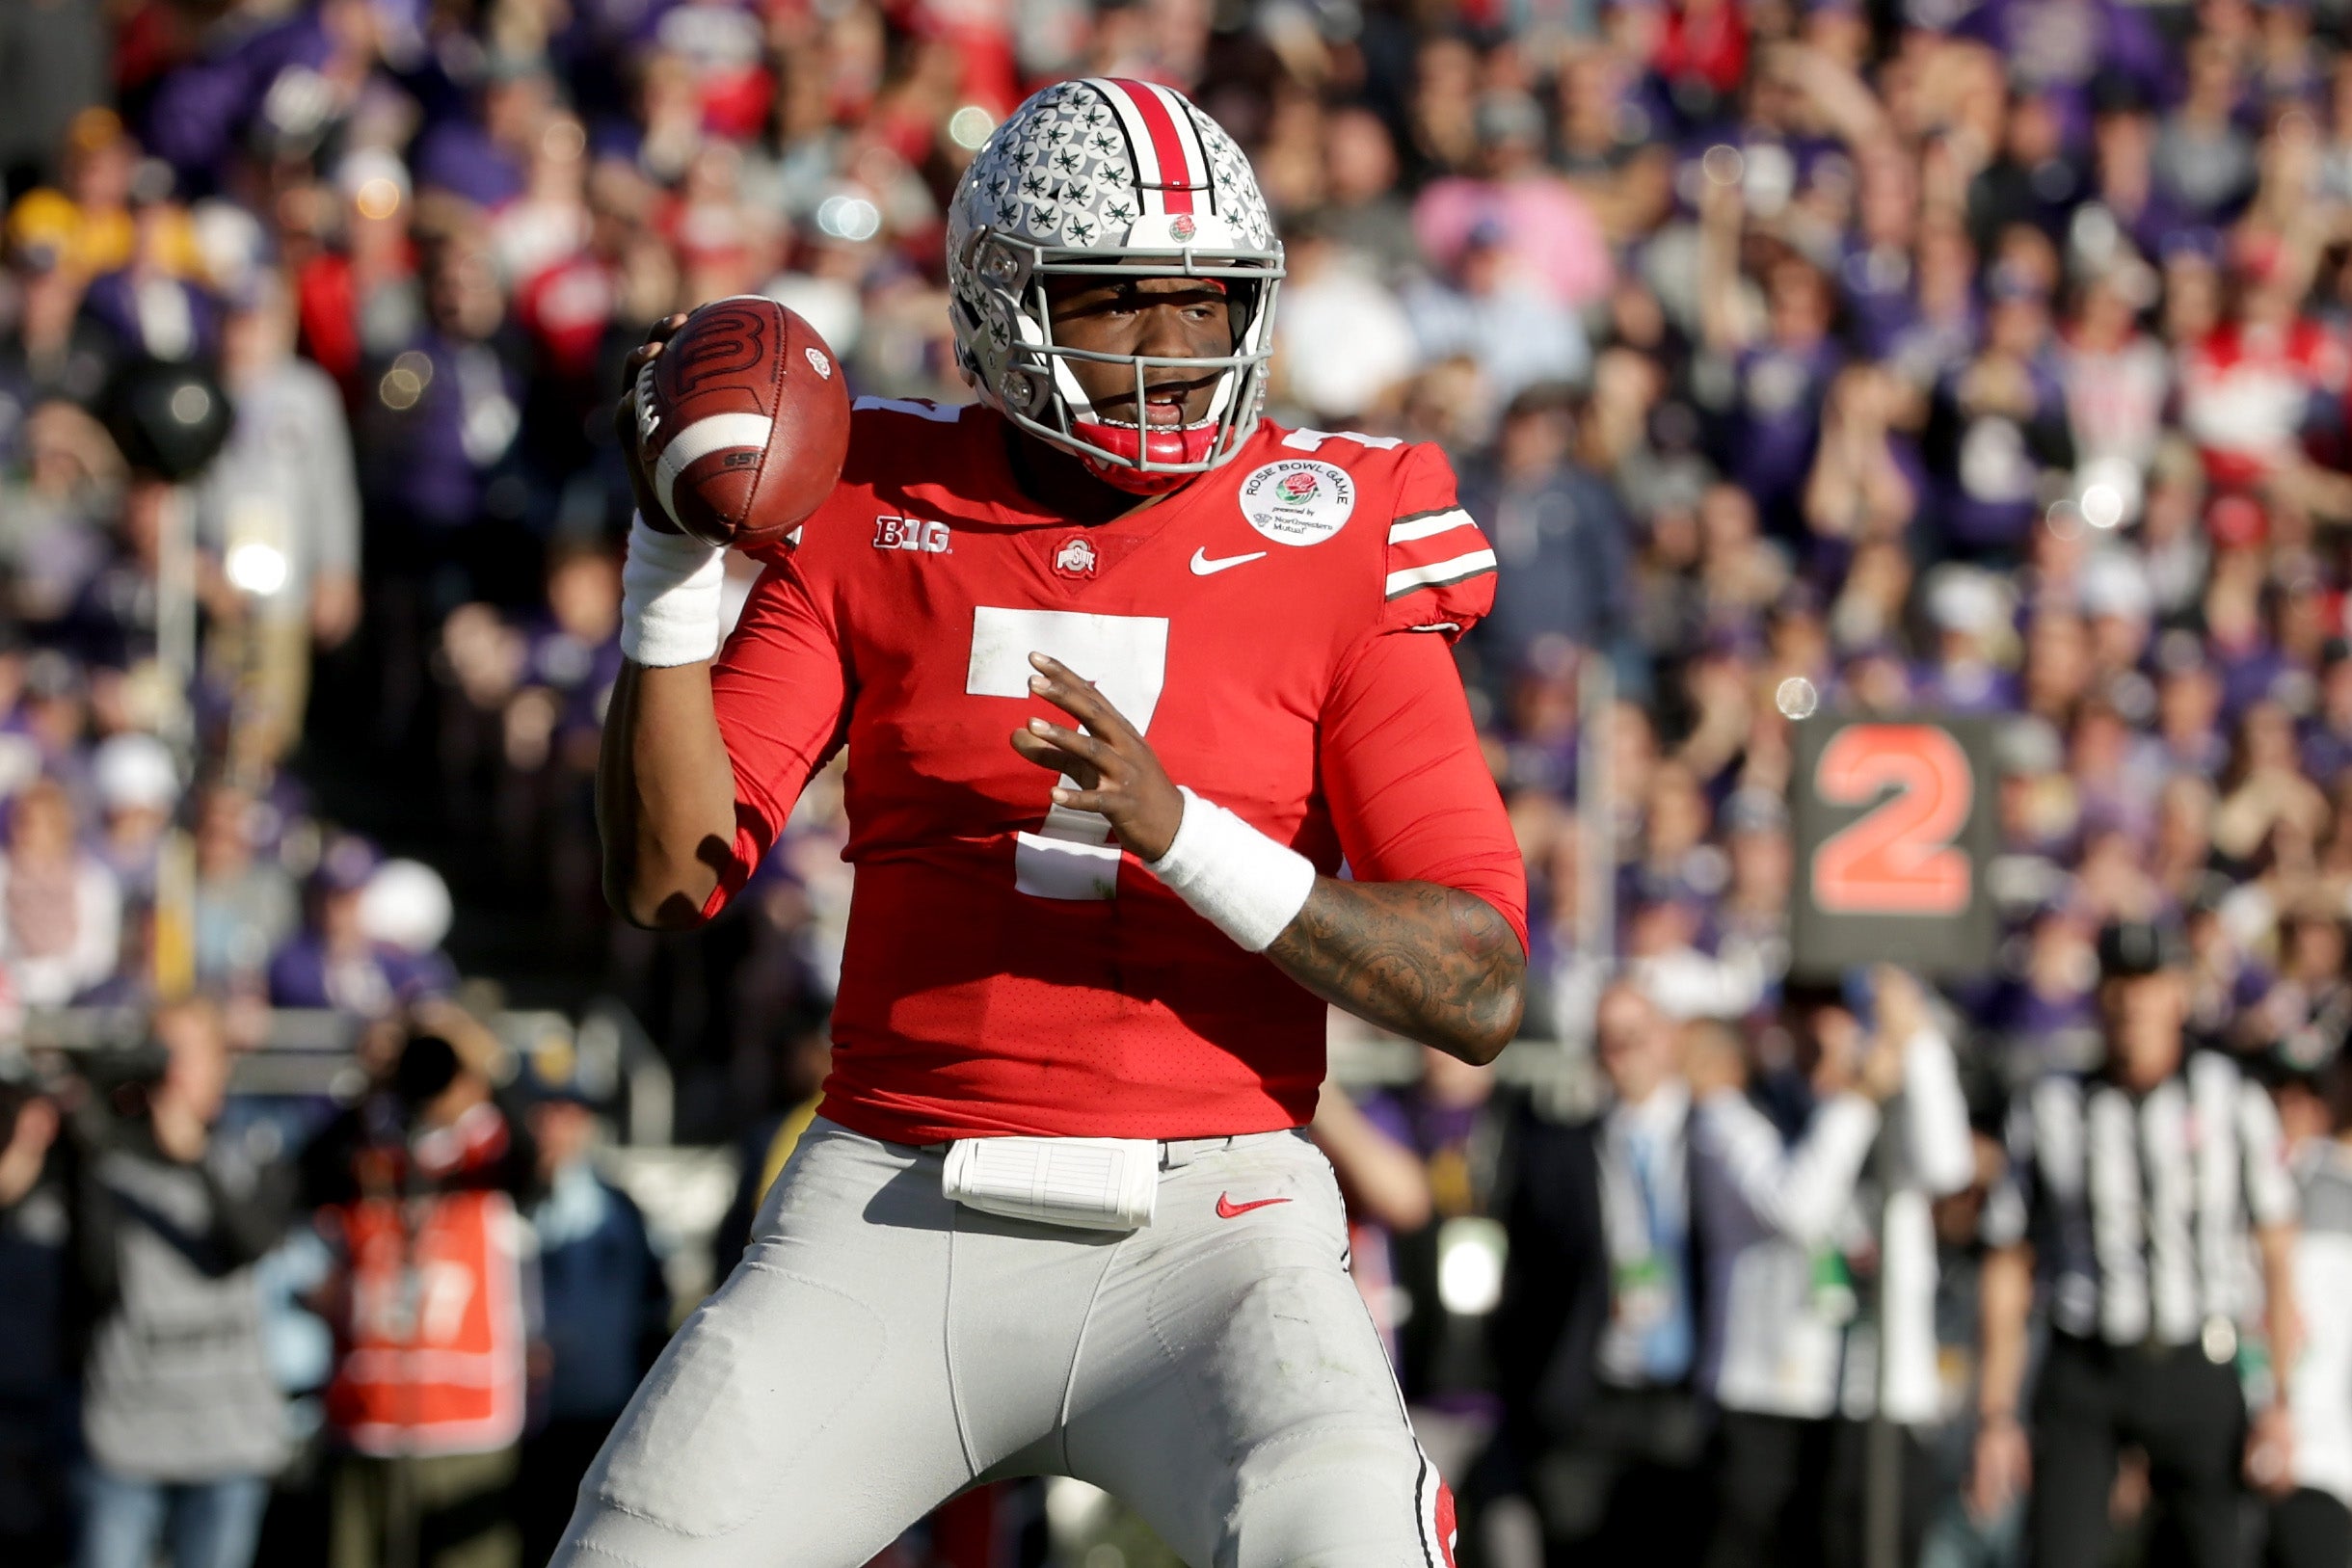 Dwayne Haskins shone in his sole season as a starter at Ohio State